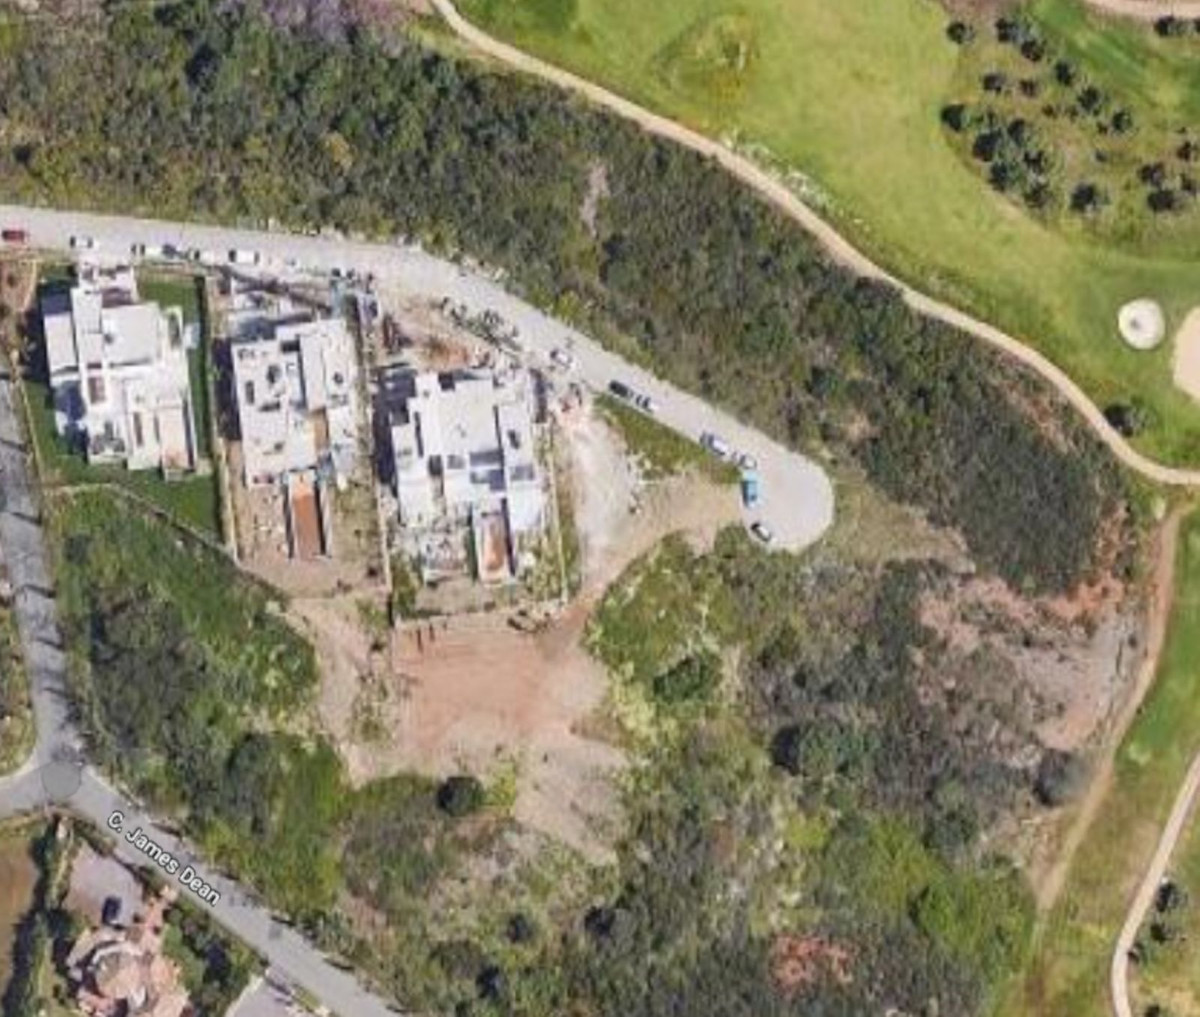 						Plot  Residential
													for sale 
																			 in Marbella
					